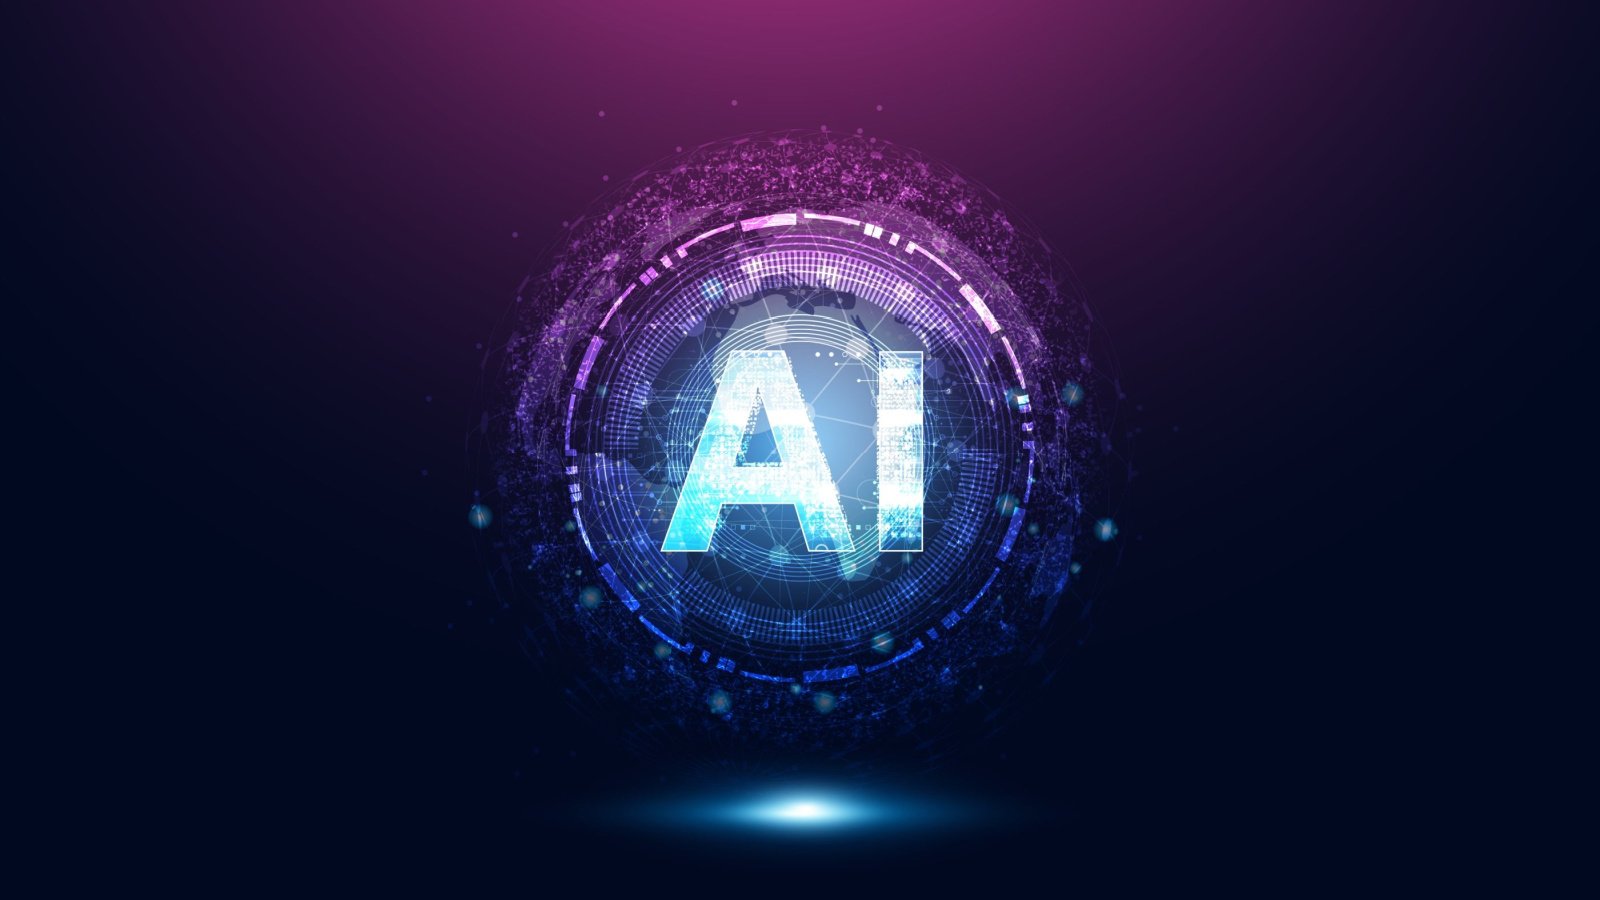 C3.ai Stock: Stay in the Trade ‘Til $40